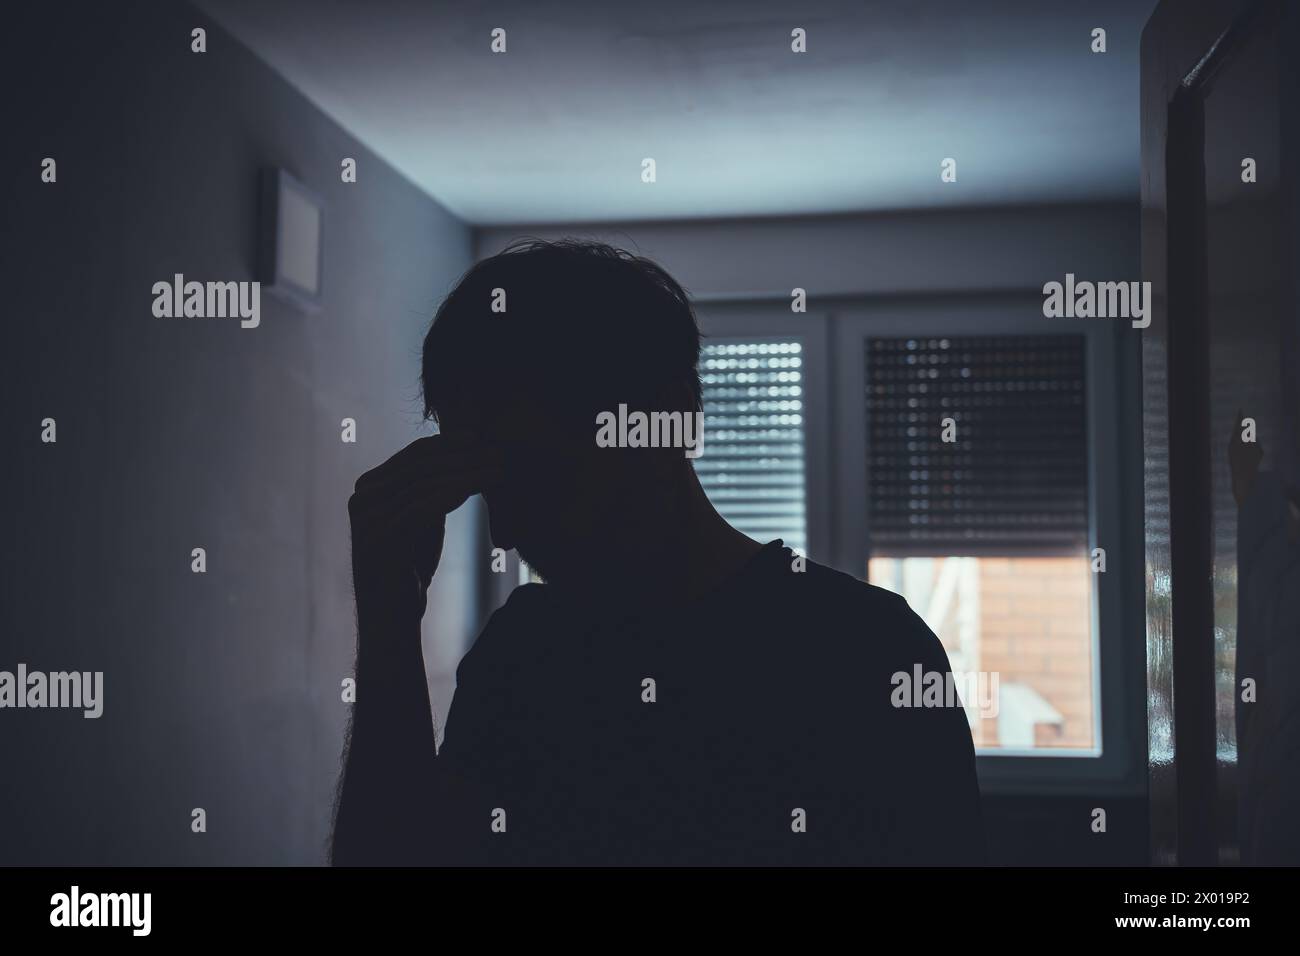 Silhouette of depressed sad man in dark room with window shutters pulled down, selective focus Stock Photo